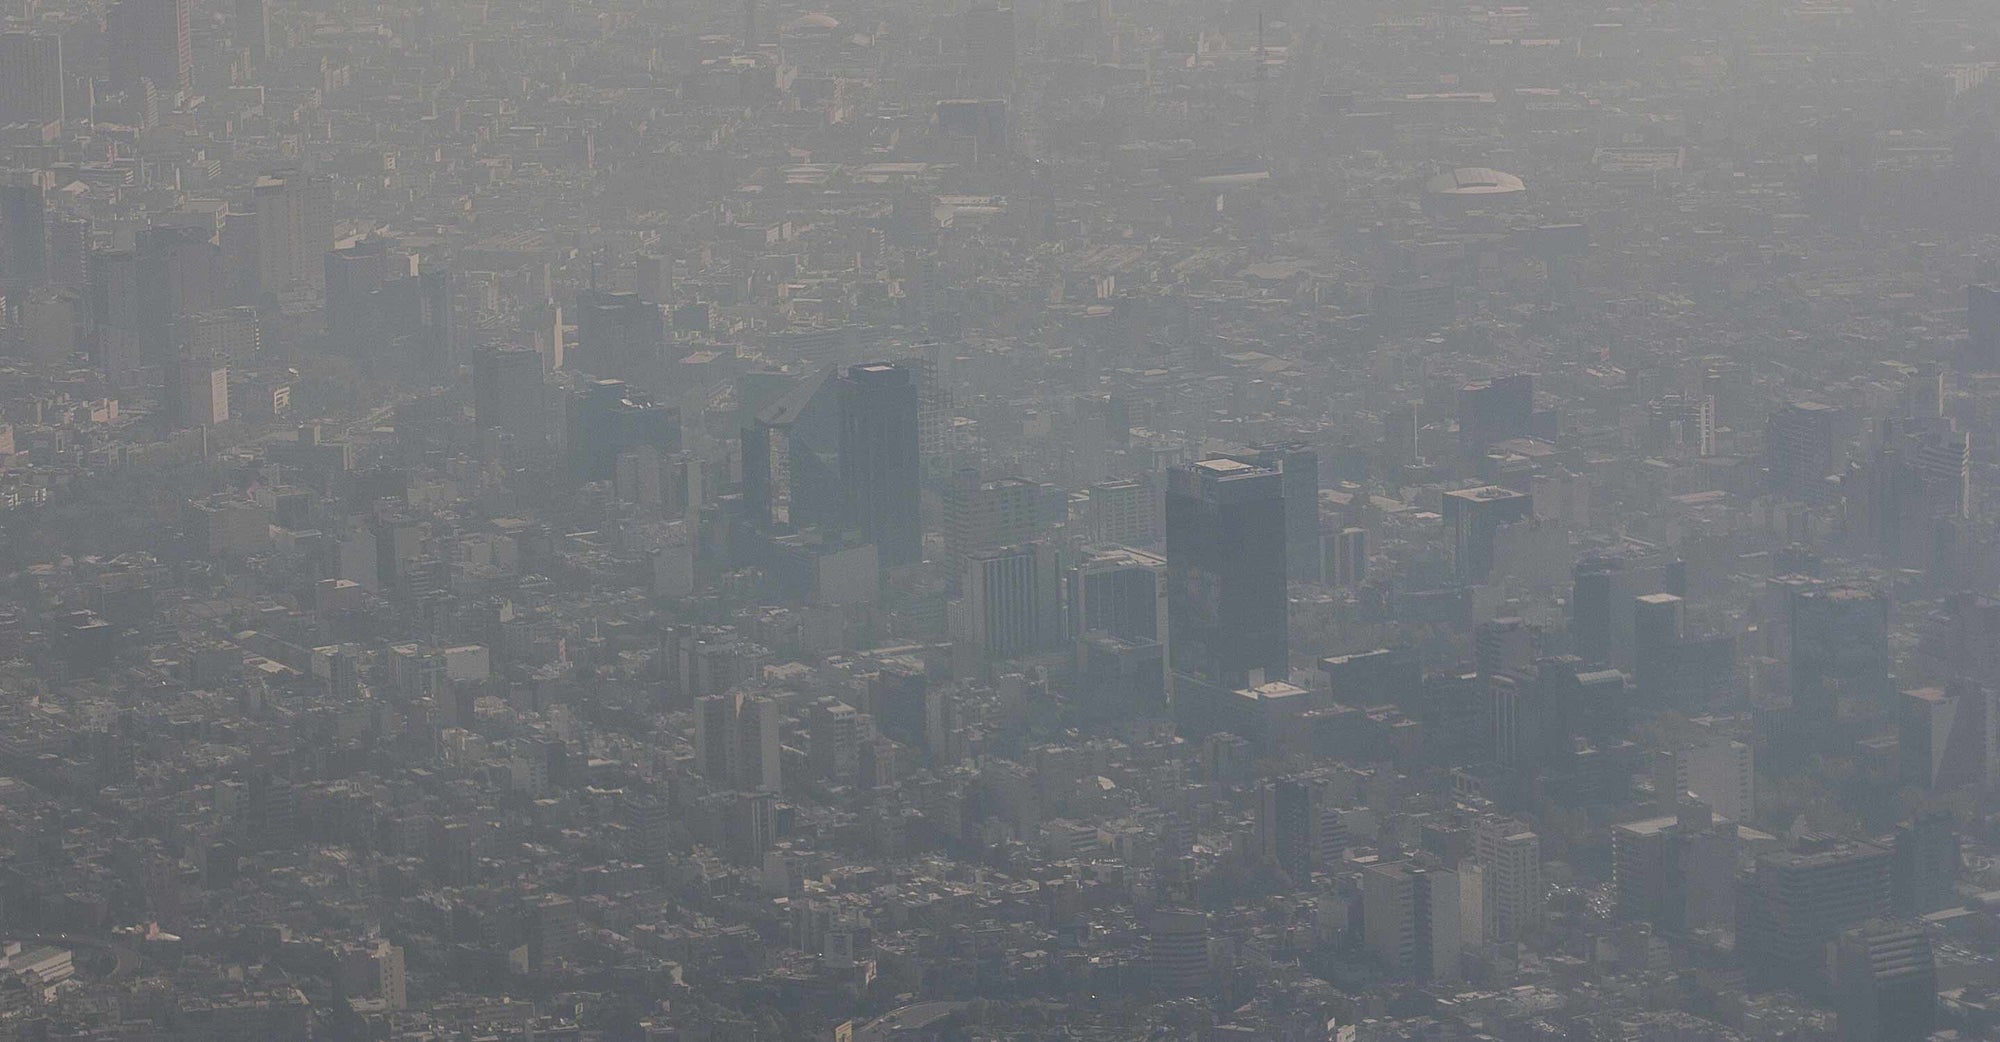 Air pollution affecting Mexico City residents